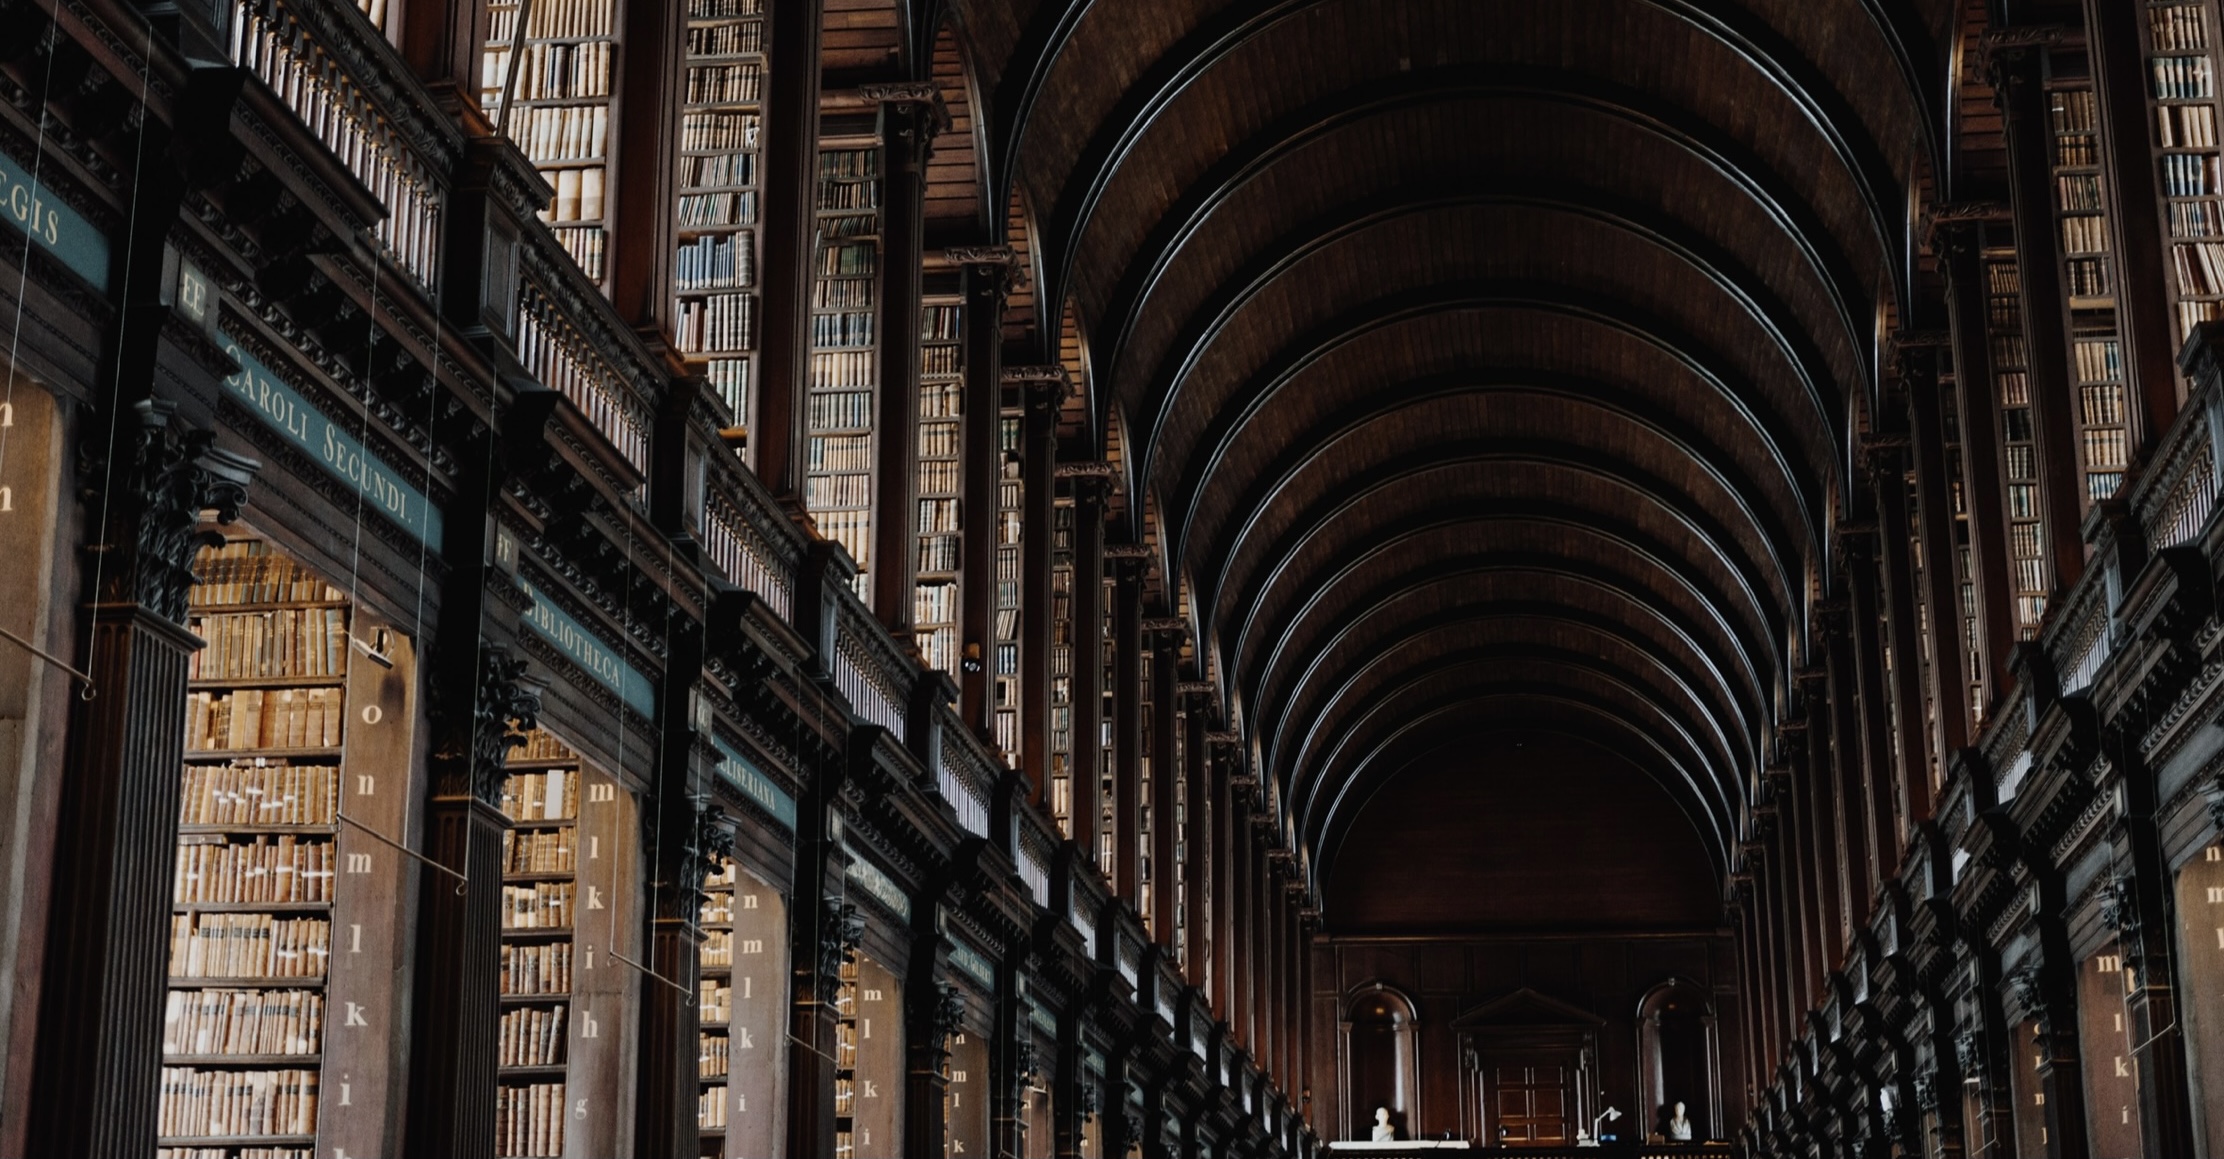 A vast library of legal books